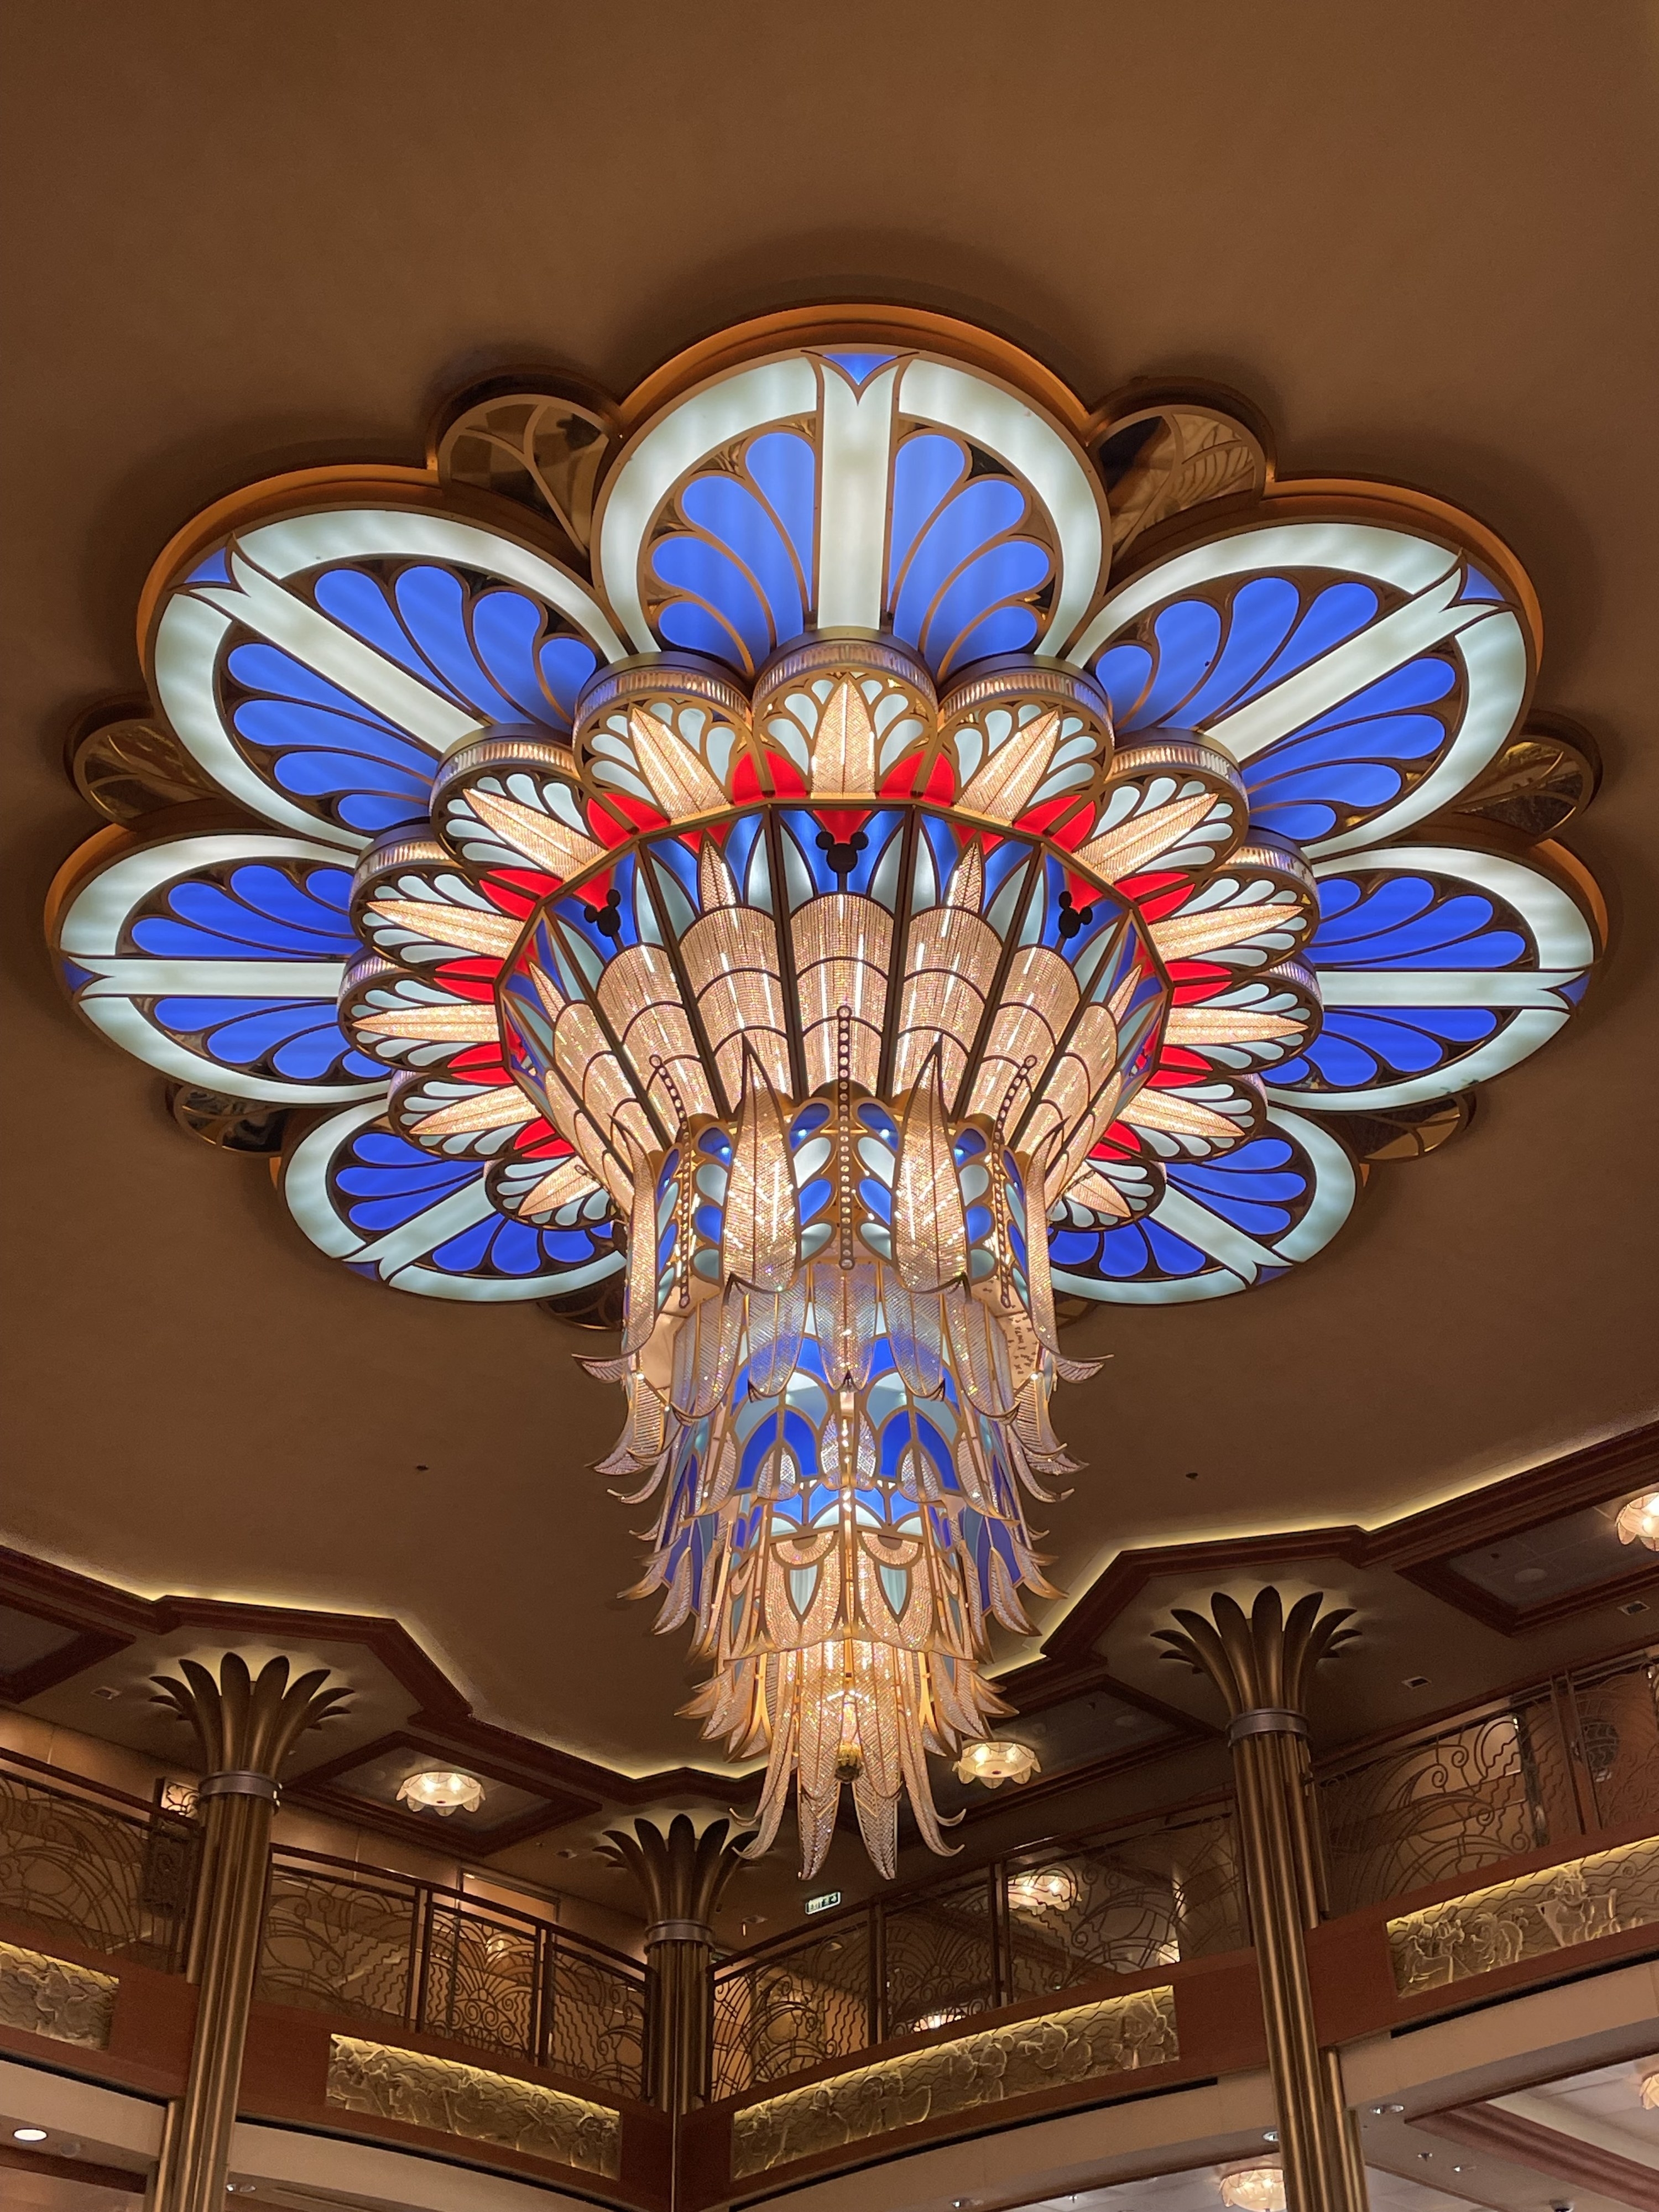 Lots of your character photos have this chandelier as a stunning backdrop.